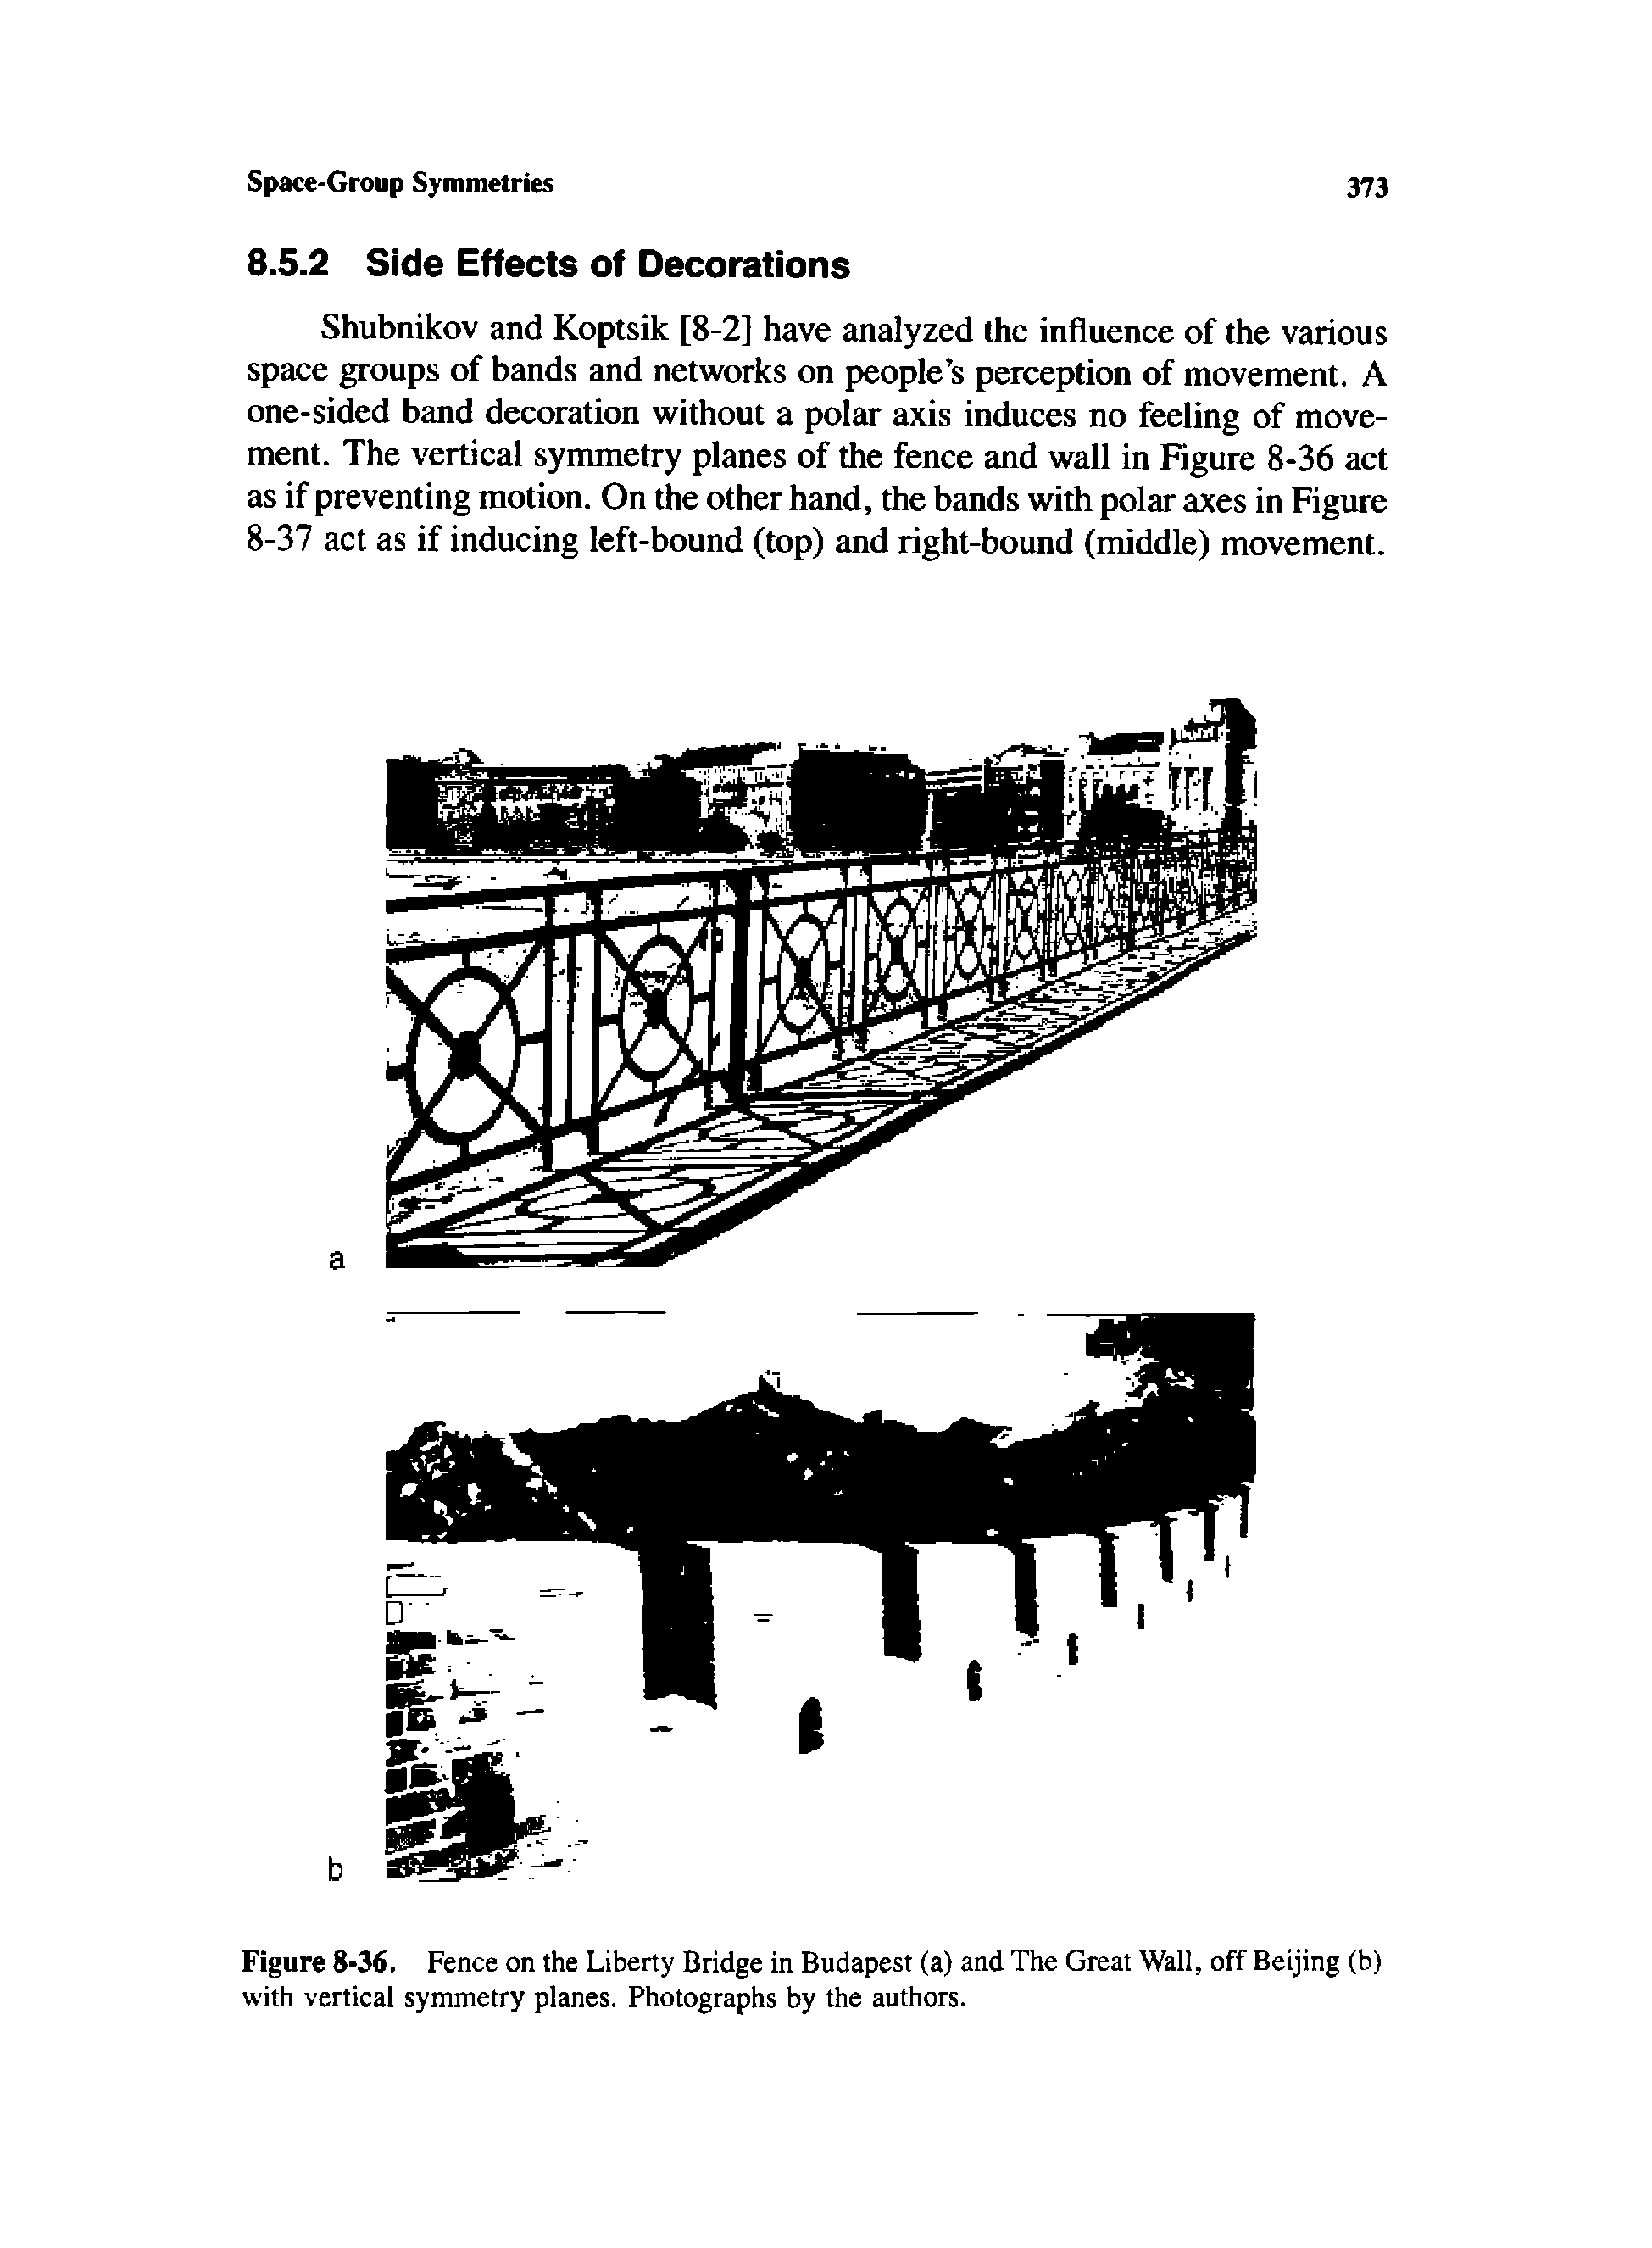 Figure 8-36. Fence on the Liberty Bridge in Budapest (a) and The Great Wall, off Beijing (b) with vertical symmetry planes. Photographs by the authors.